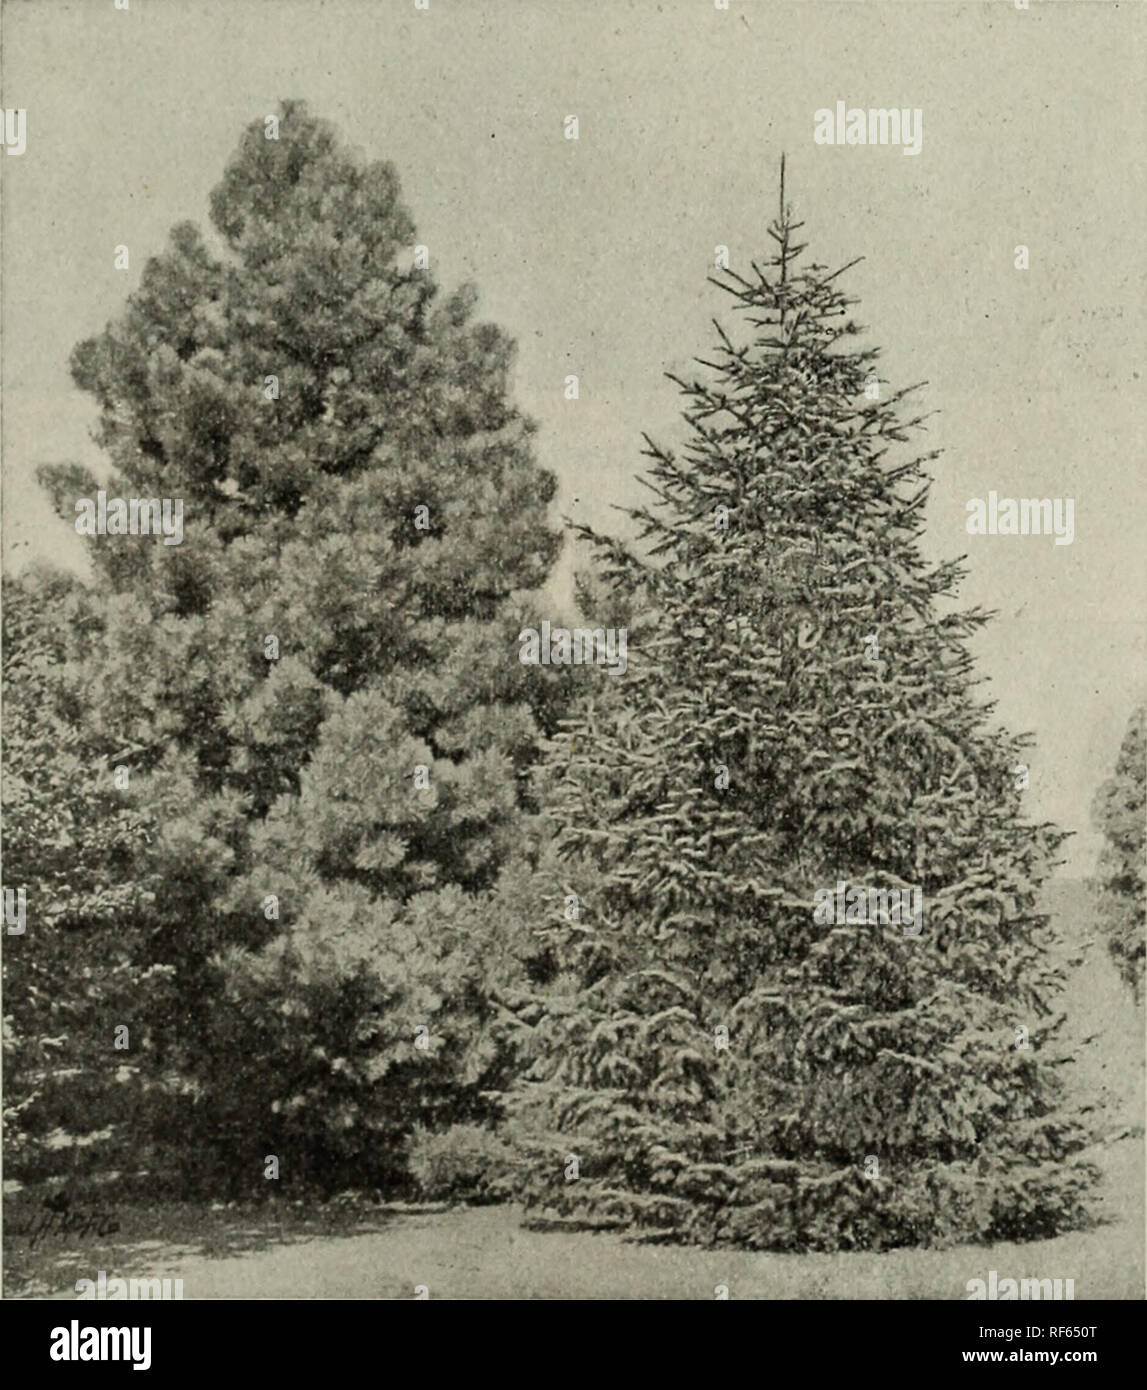 . Trees for Long Island. Nursery stock New York (State) Westbury (Nassau County) Catalogs; Nurseries (Horticulture) New York (State) Westbury (Nassau County) Catalogs; Fruit Seedlings Catalogs; Trees Seedlings Catalogs; Ornamental shrubs Catalogs; Flowers Catalogs. 'yyESTBURY NURSERIES Evergreen Trees 15 EVERGREENS. The selection of Evergreens is usually attended with some difficulty and confusion. To obviate this, we have endeavored to state the cliaracter and limitations of the best varieties. We are testing all the hardy species that can be procured, and if our customers desire any that are Stock Photo